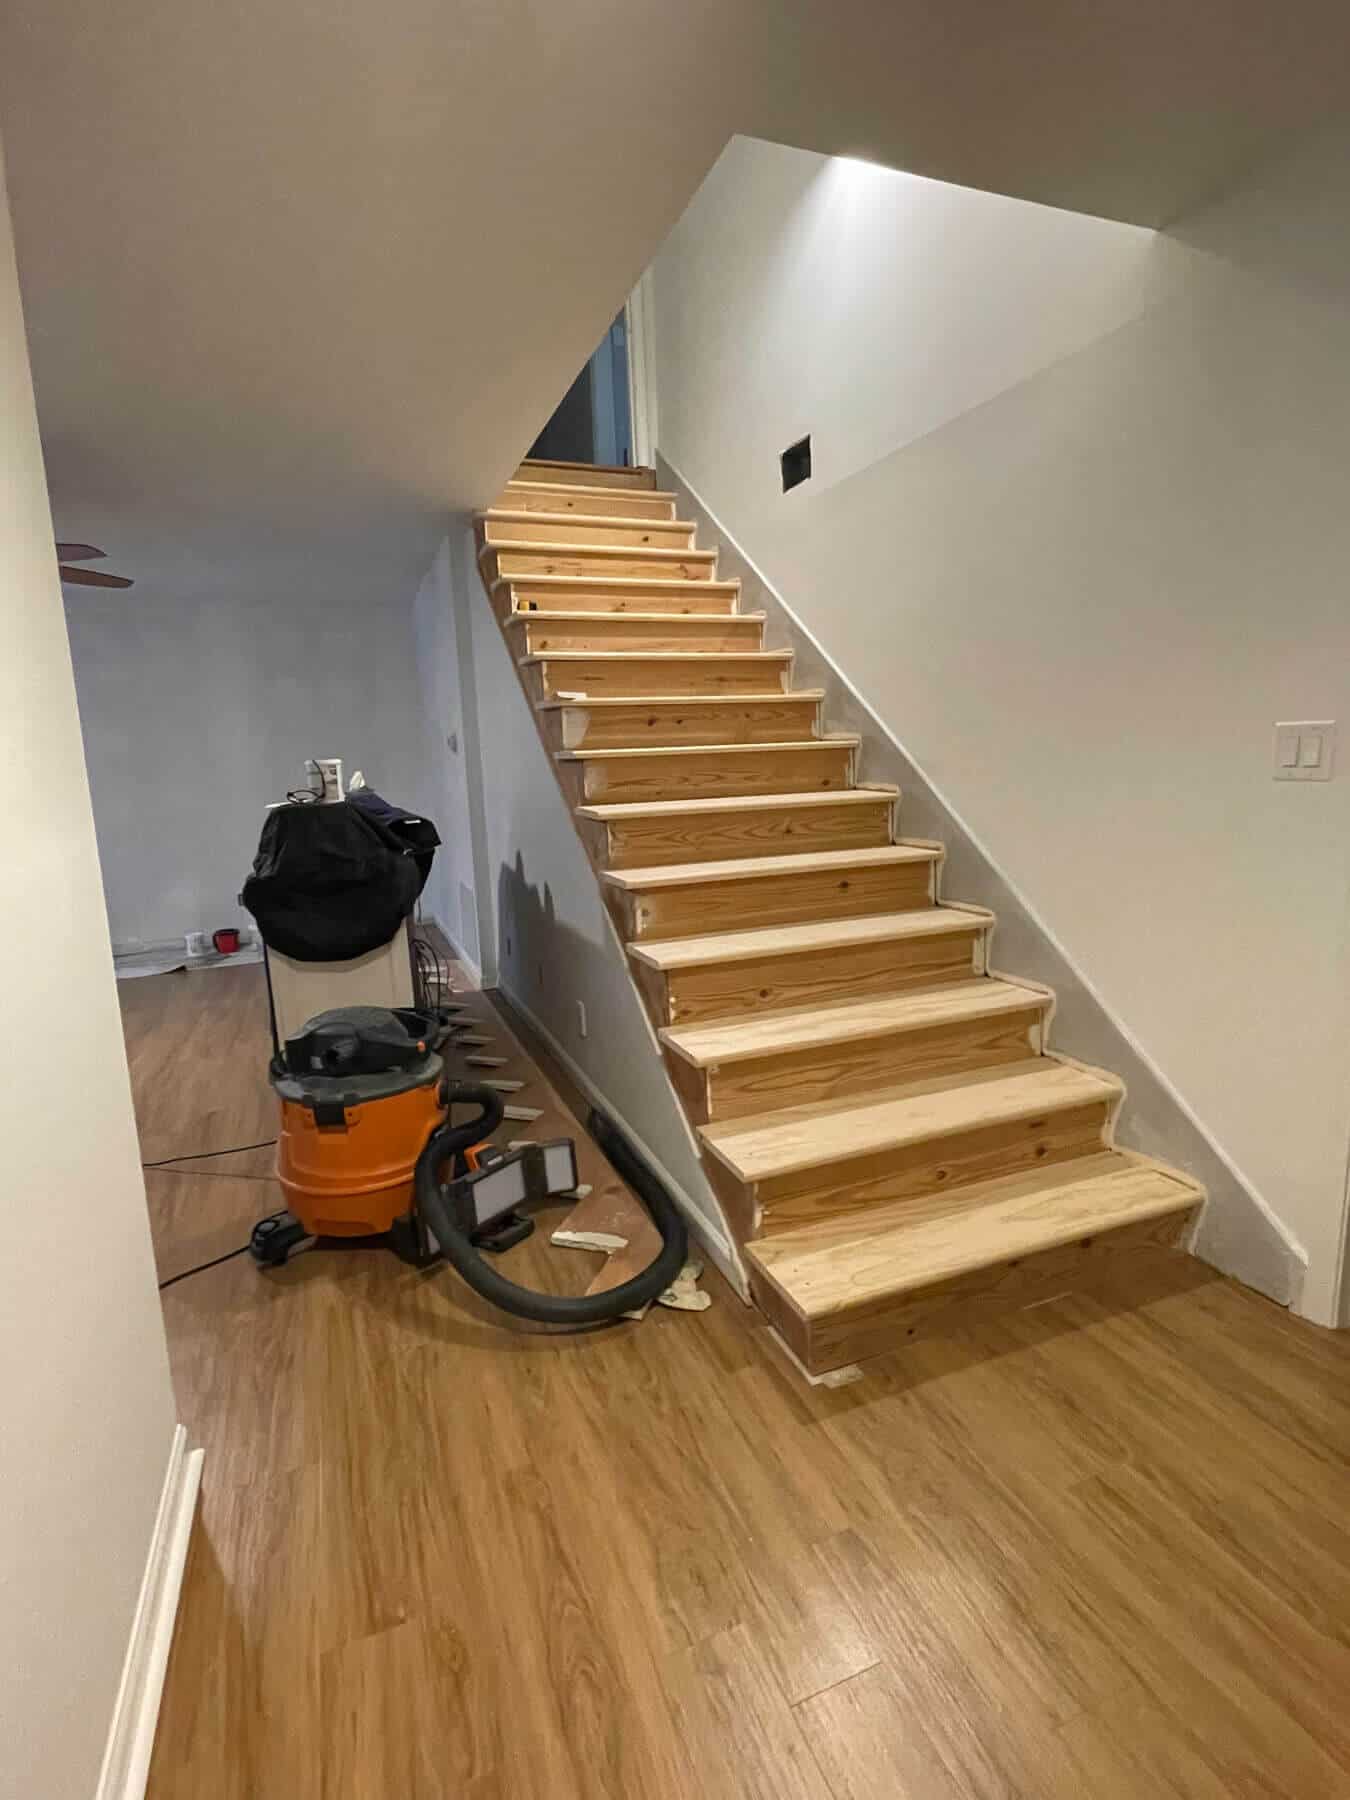 new stair treads installed on a basement staircase